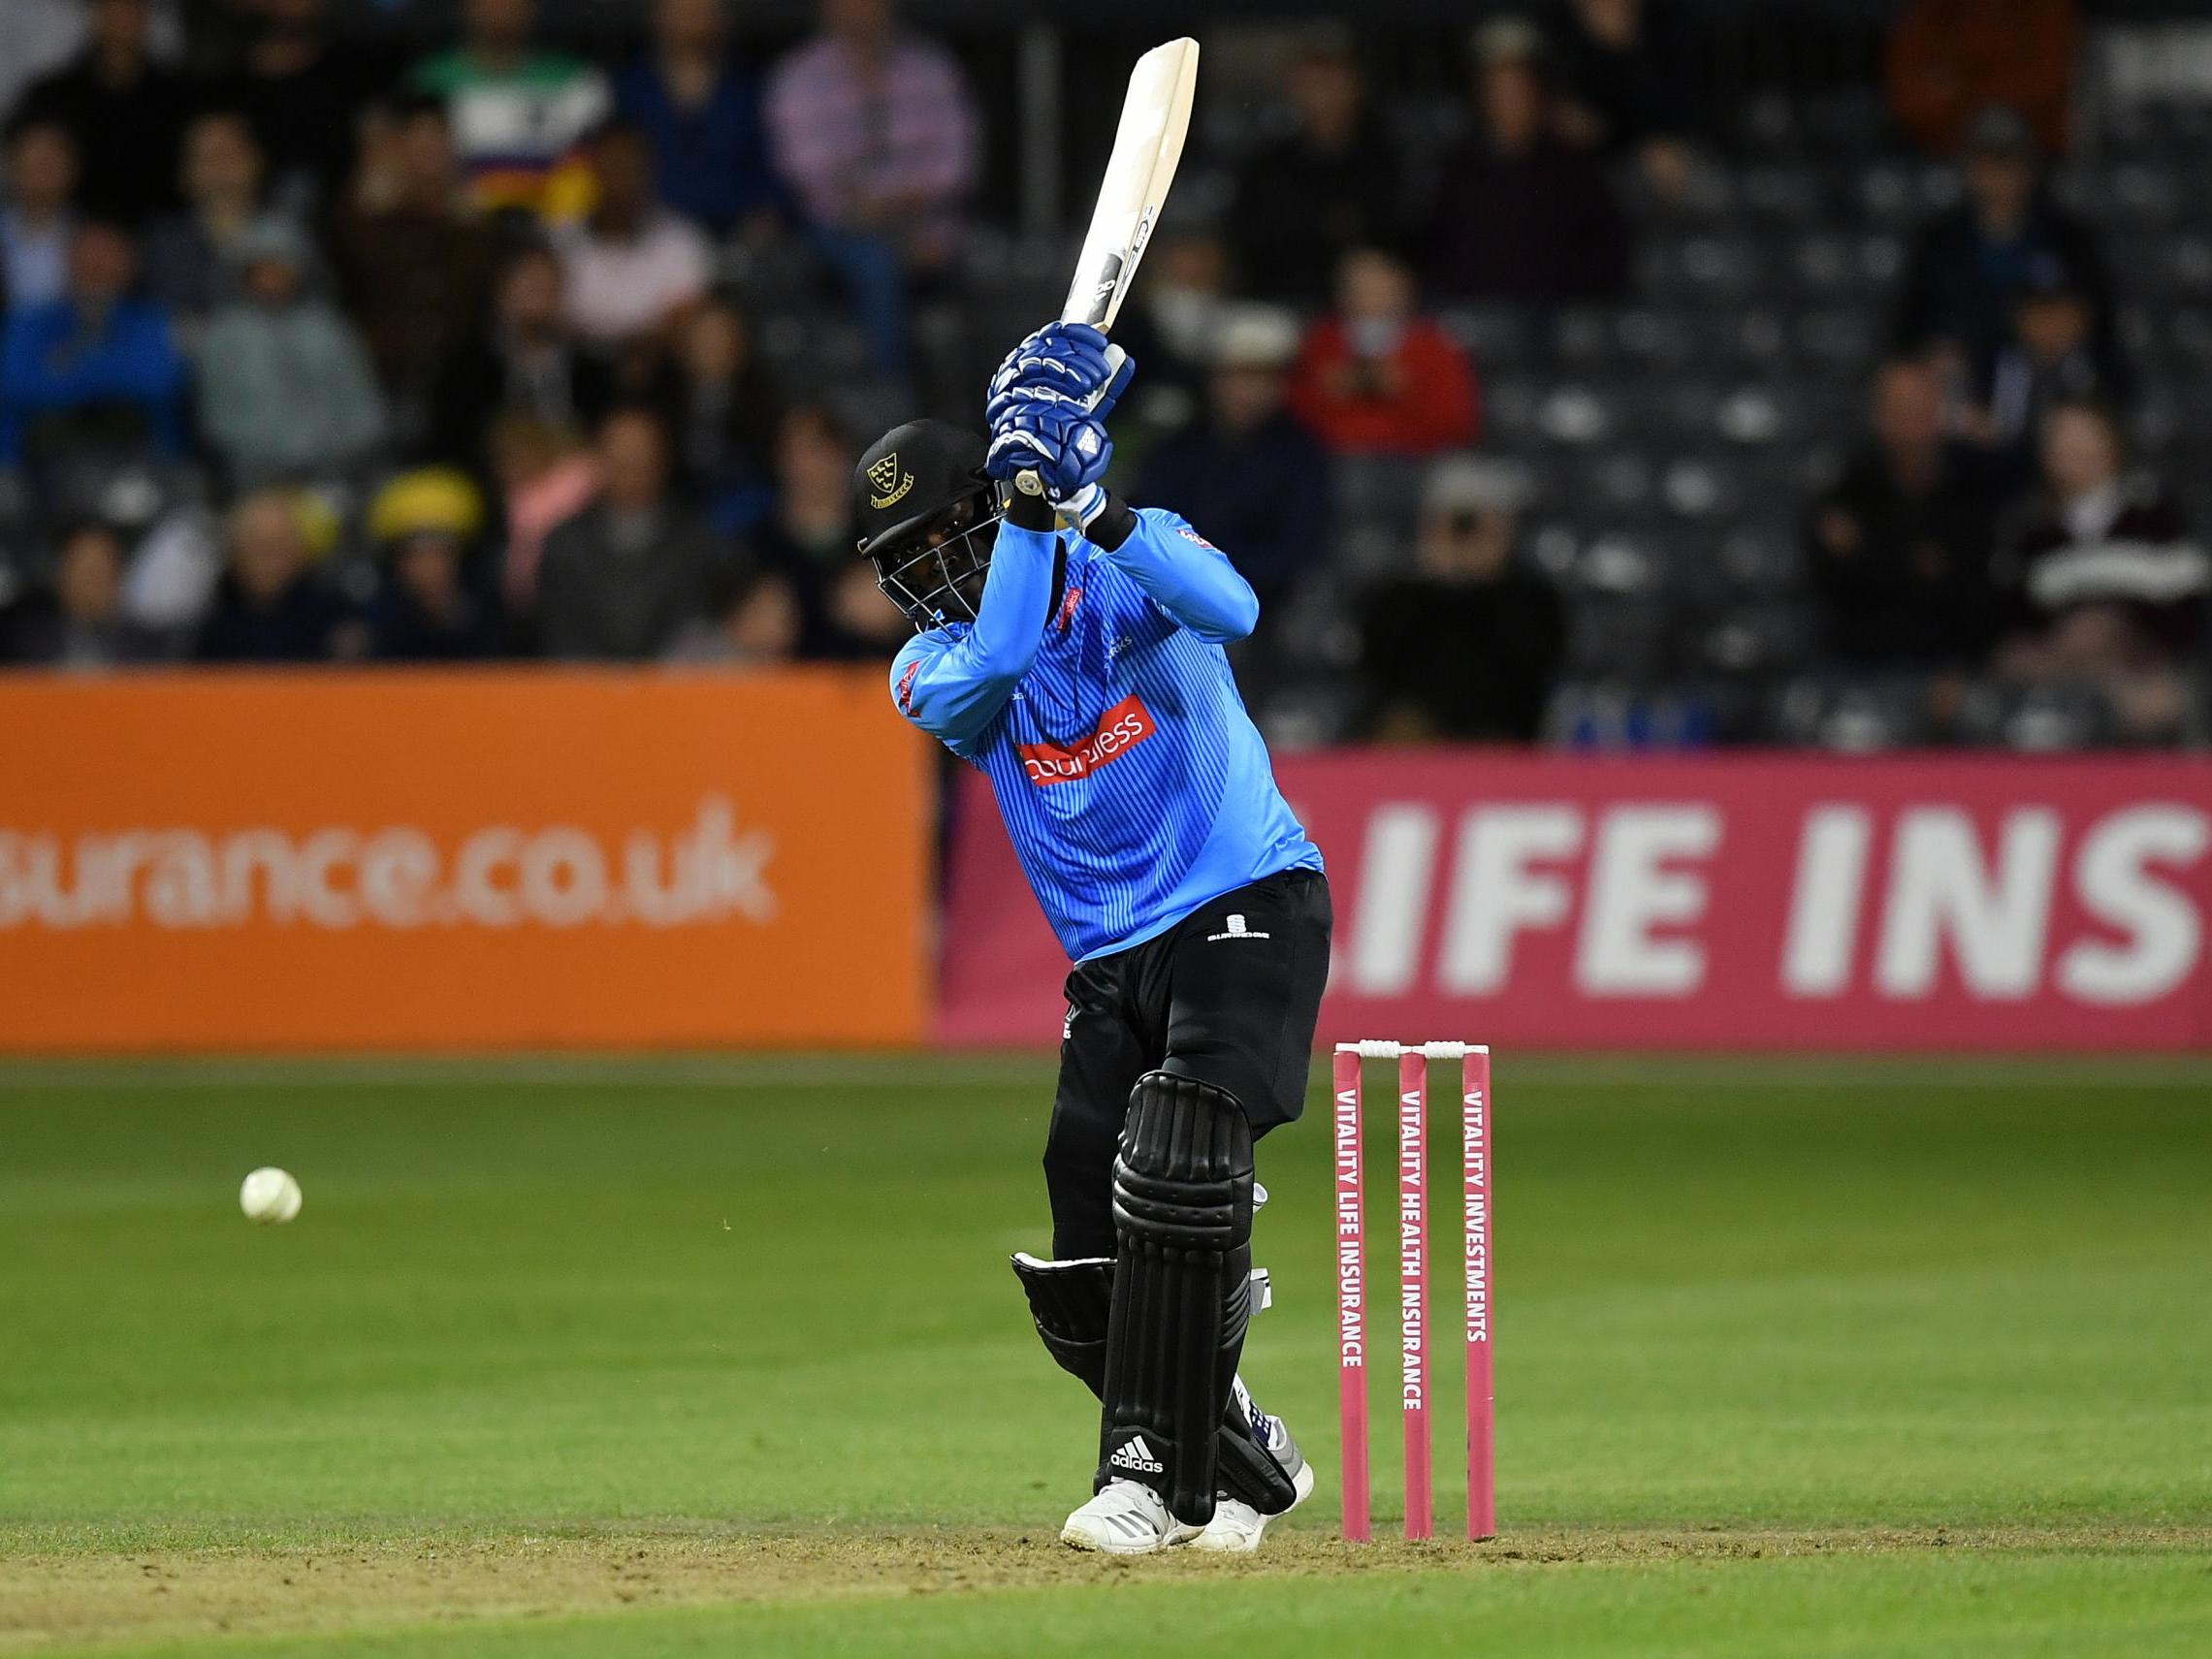 Archer has impressed with bat and ball for Sussex